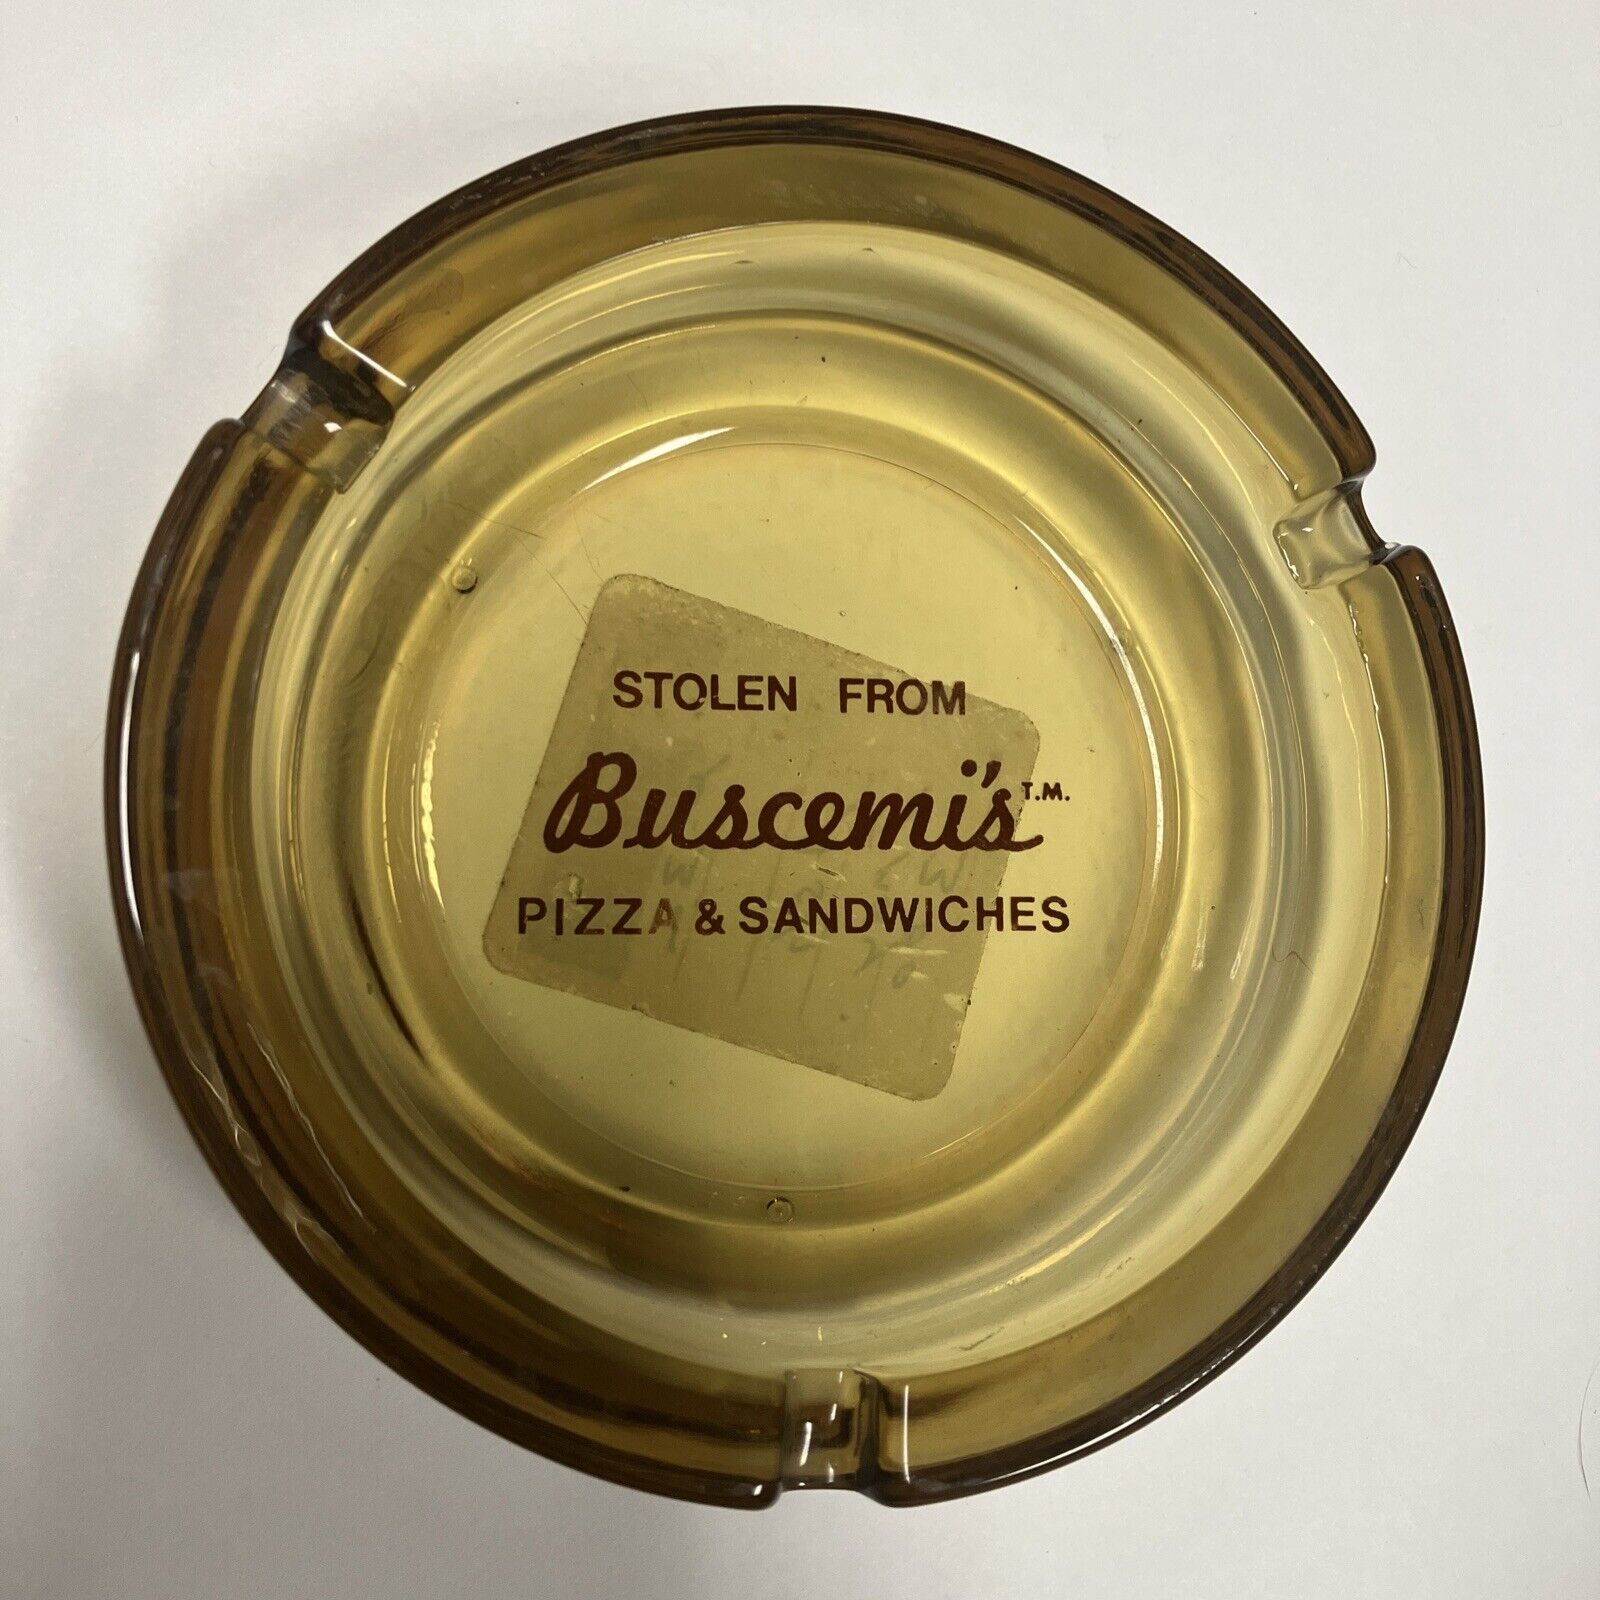 Vintage Antique Ash Tray “stolen From Buscemi’s” Pizza And Sandwiches”